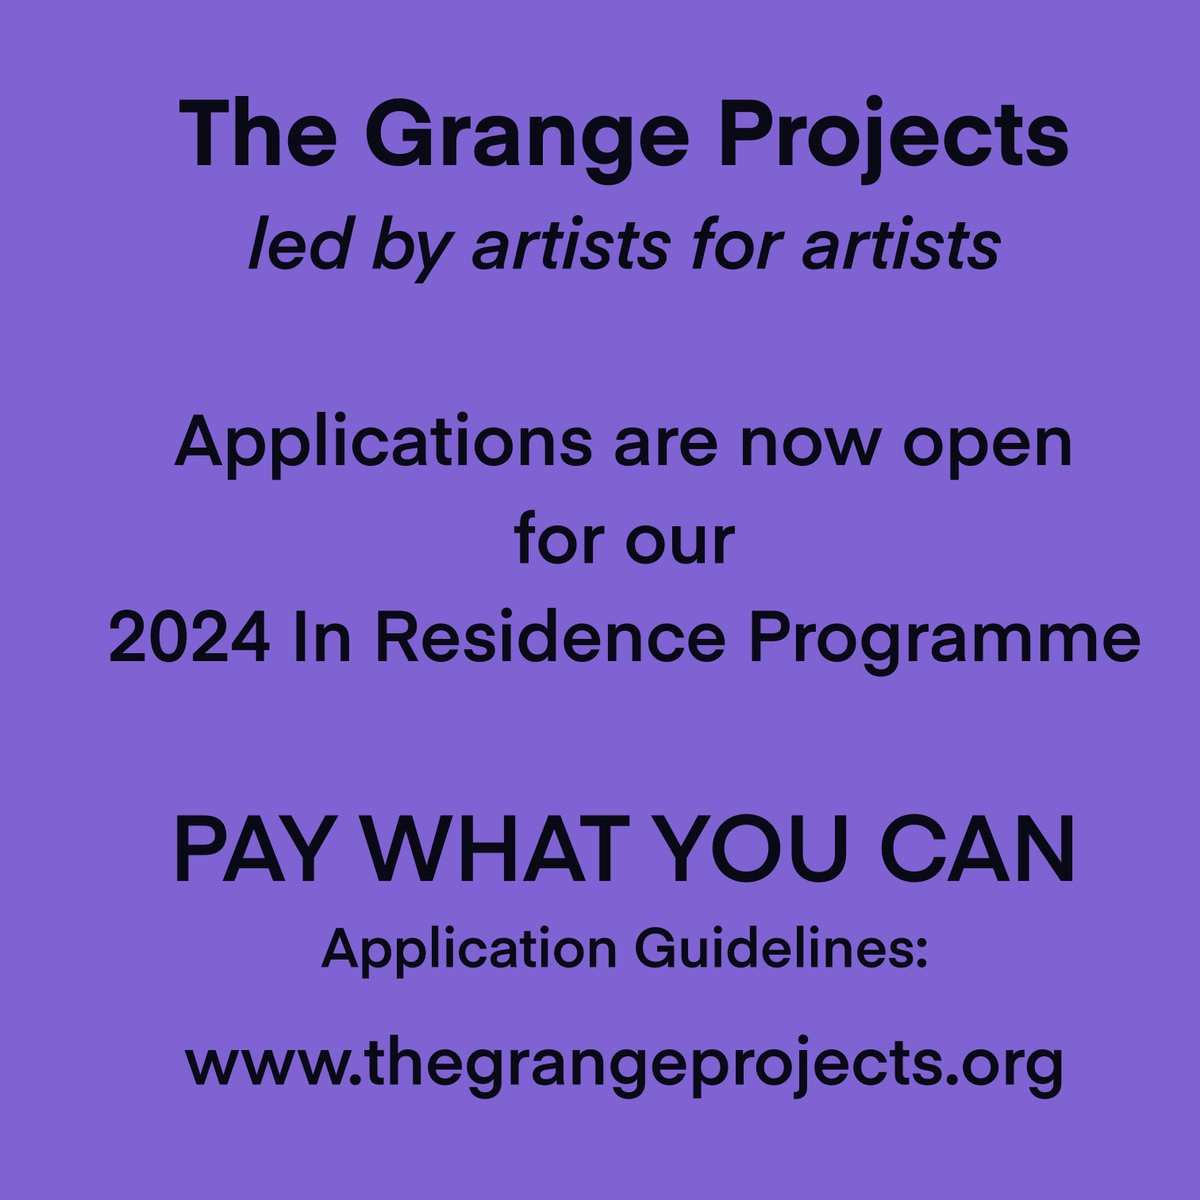 Everyone's welcome to apply. Next deadline 15 March. Application guidelines thegrangeprojects.org/copy-of-applic…
#artistopencalls #opencalls #artistsopencall #artistresidencies